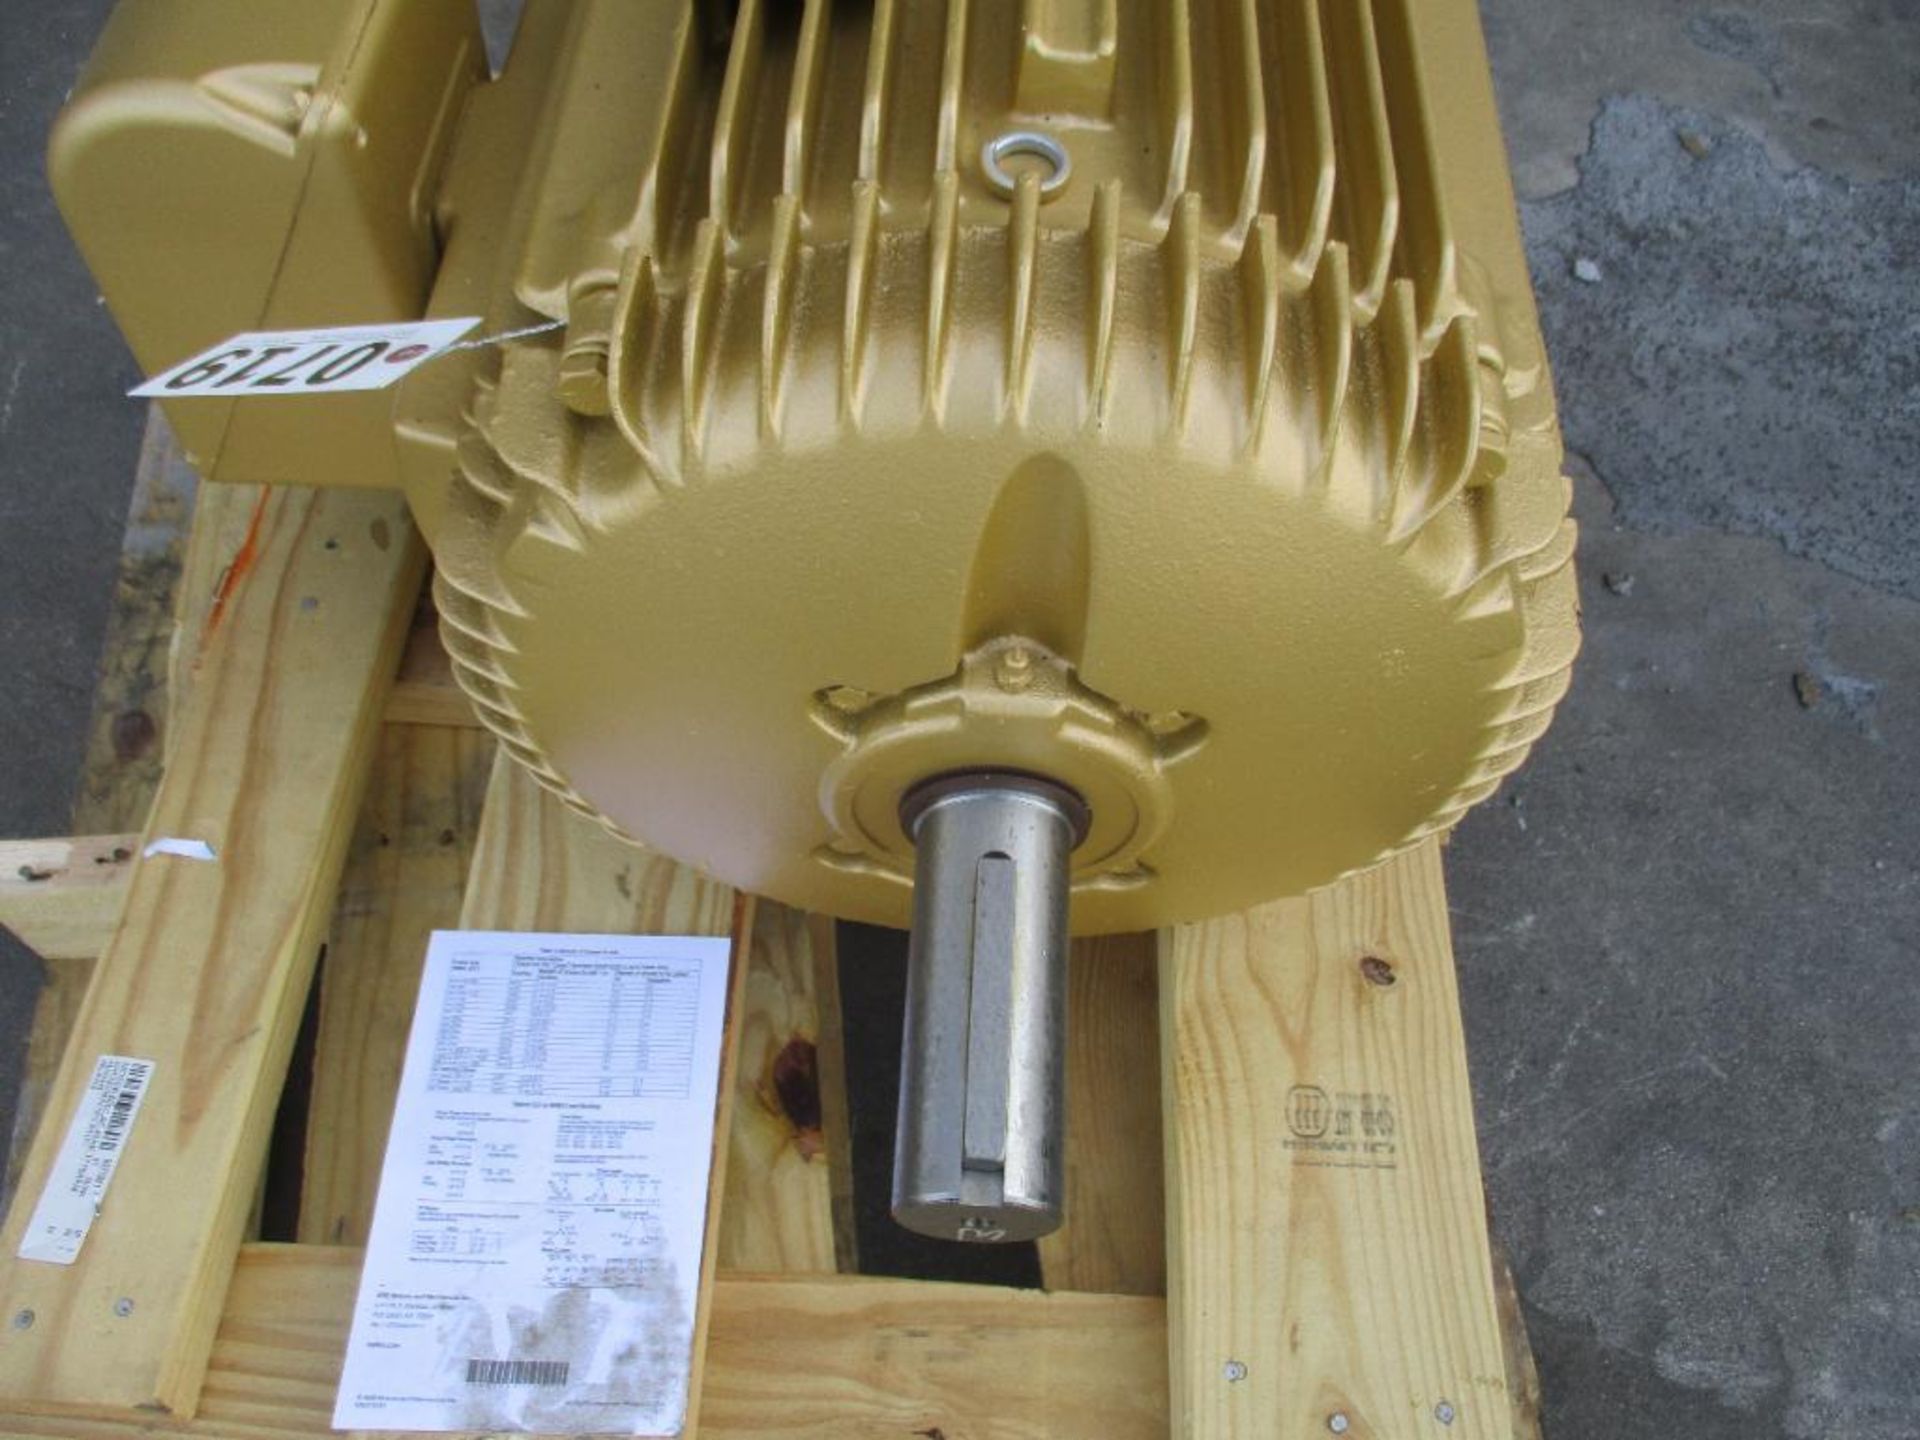 BALDOR 3 PHASE 40HP 1775RPM 324T FRAME A/C MOTOR P/N EM4110T 585# LBS (THIS LOT IS FOB KNOXVILLE TN) - Image 5 of 5